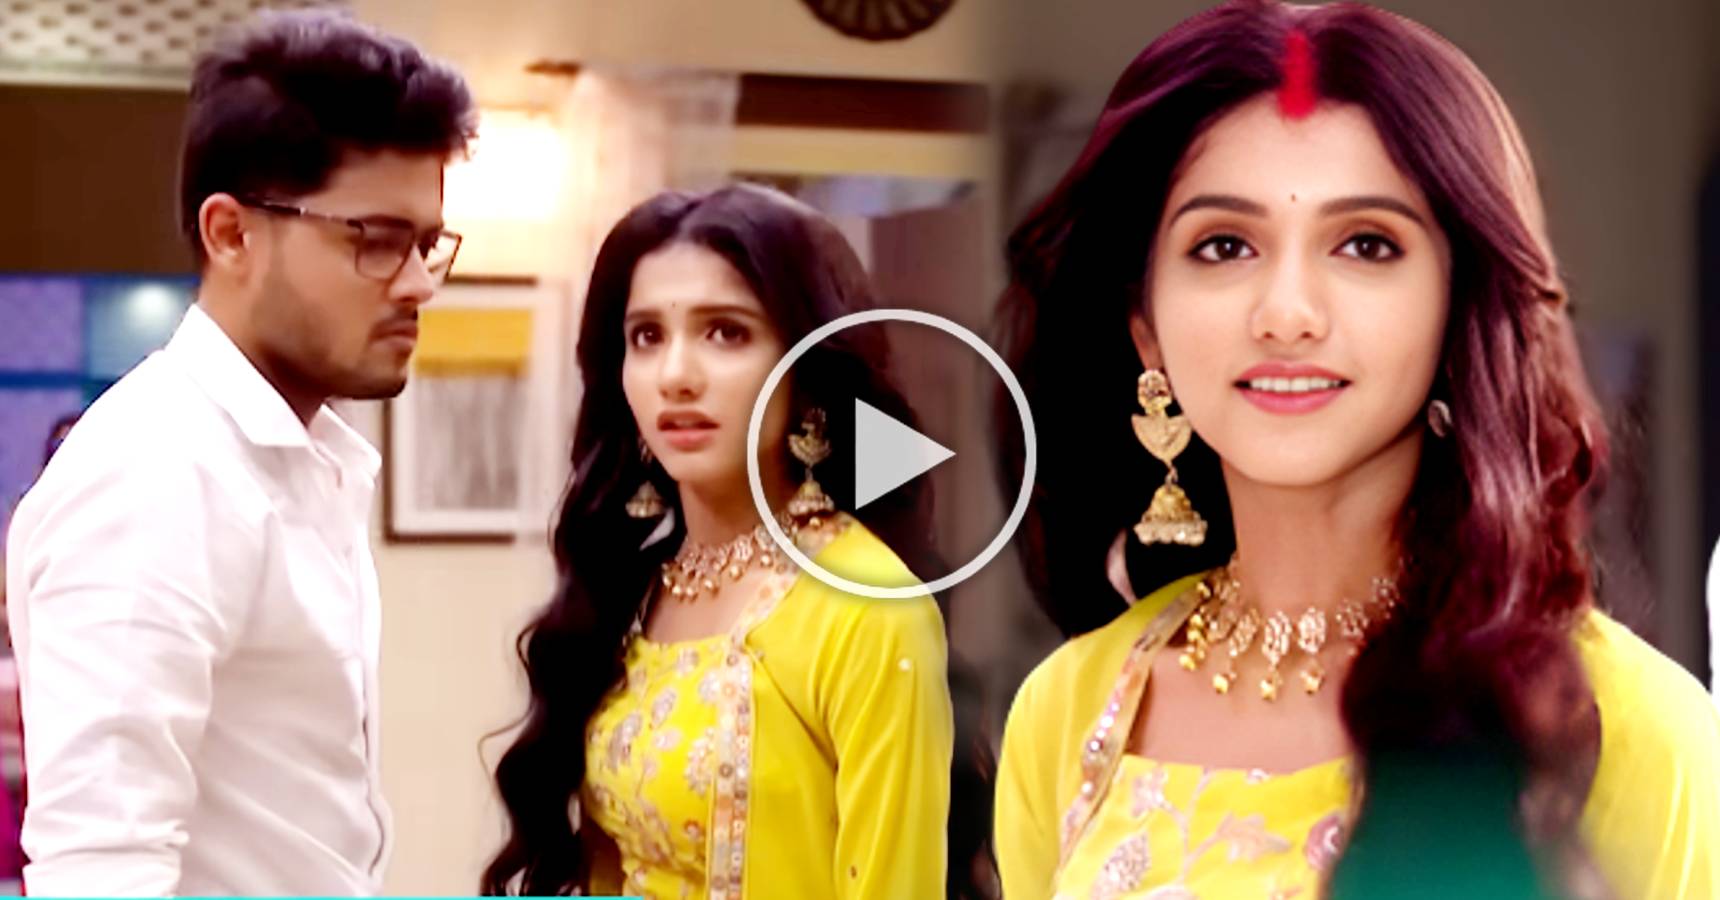 Star Jalsha Bengali serial Tomader Rani Durjoy and Rani get married promo is out now